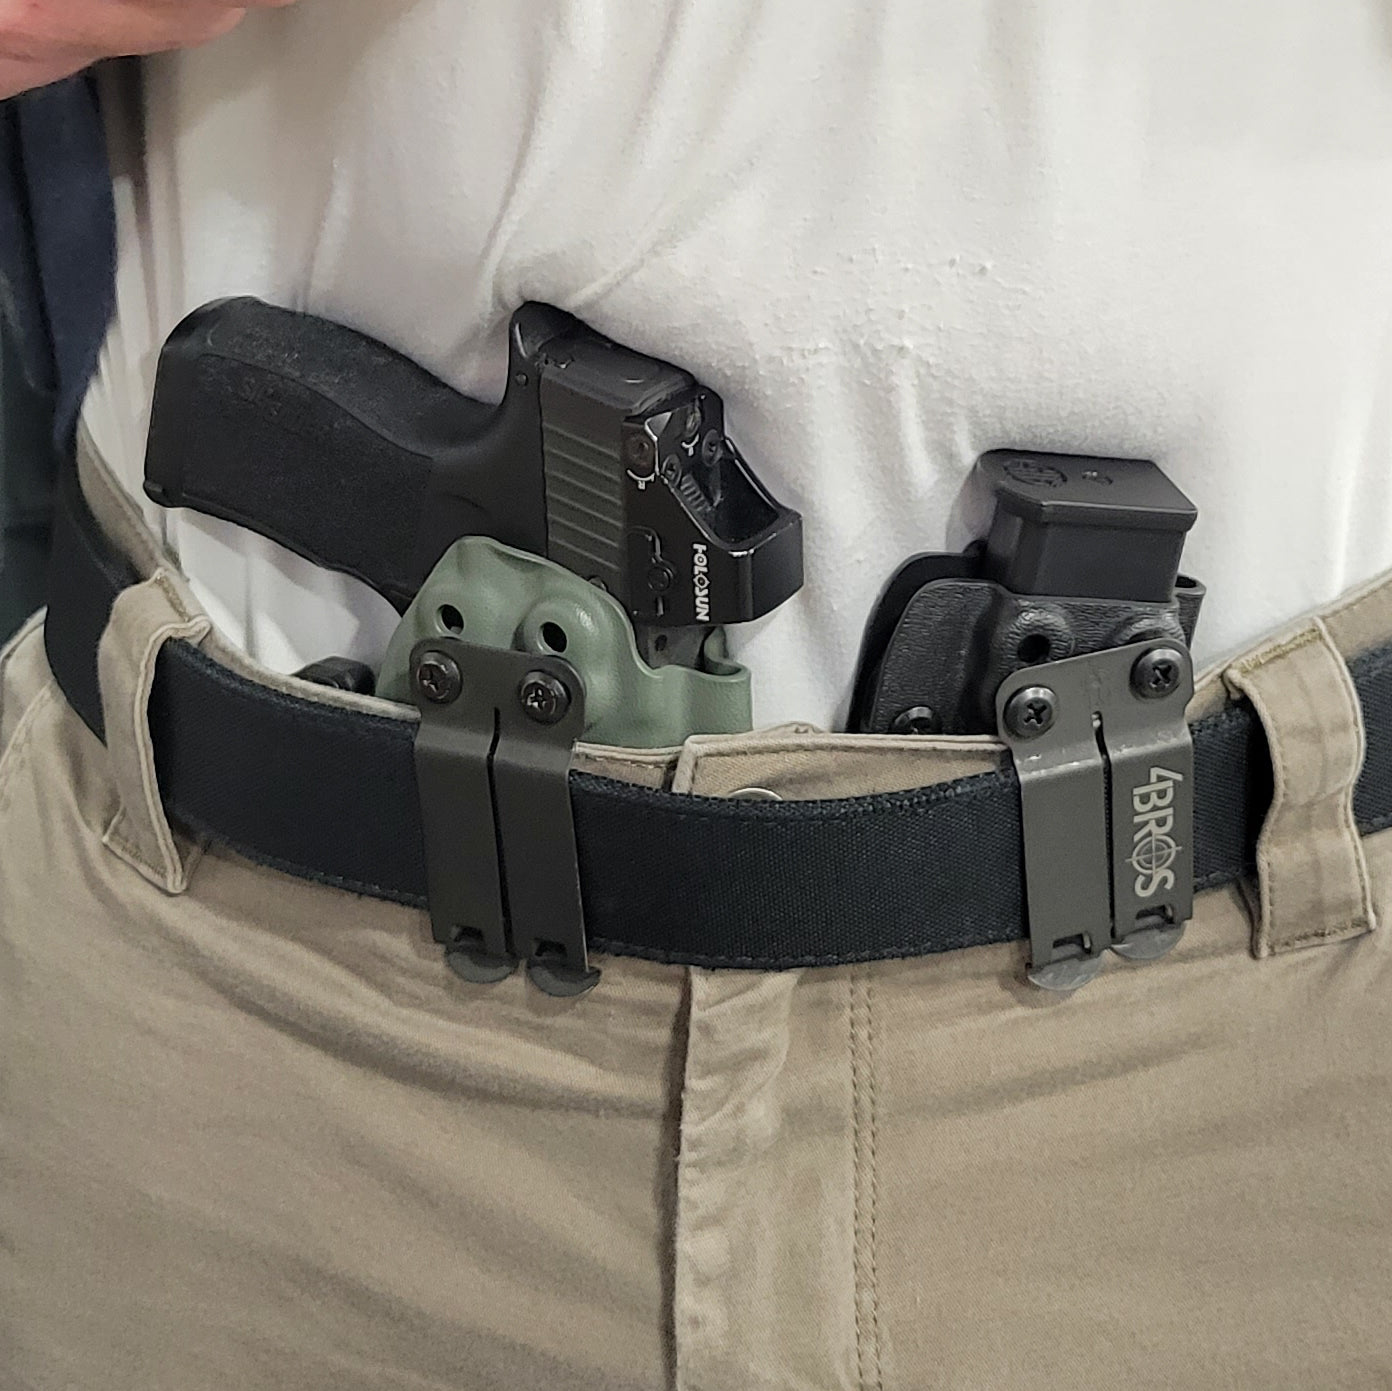 For the Best Kydex IWB AIWB appendix inside waistband magazine pouch for the Glock 43X & 48, shop Four Brothers Holsters.  Suitable for belt widths of 1 1/2" & 1 3/4". Adjustable retention. Appendix Carry IWB Carrier Holster P365X-MACRO, Sig P365XL, Glock 43X & 48, Springfield Hellcat Pro, and Smith & Wesson Equalizer 